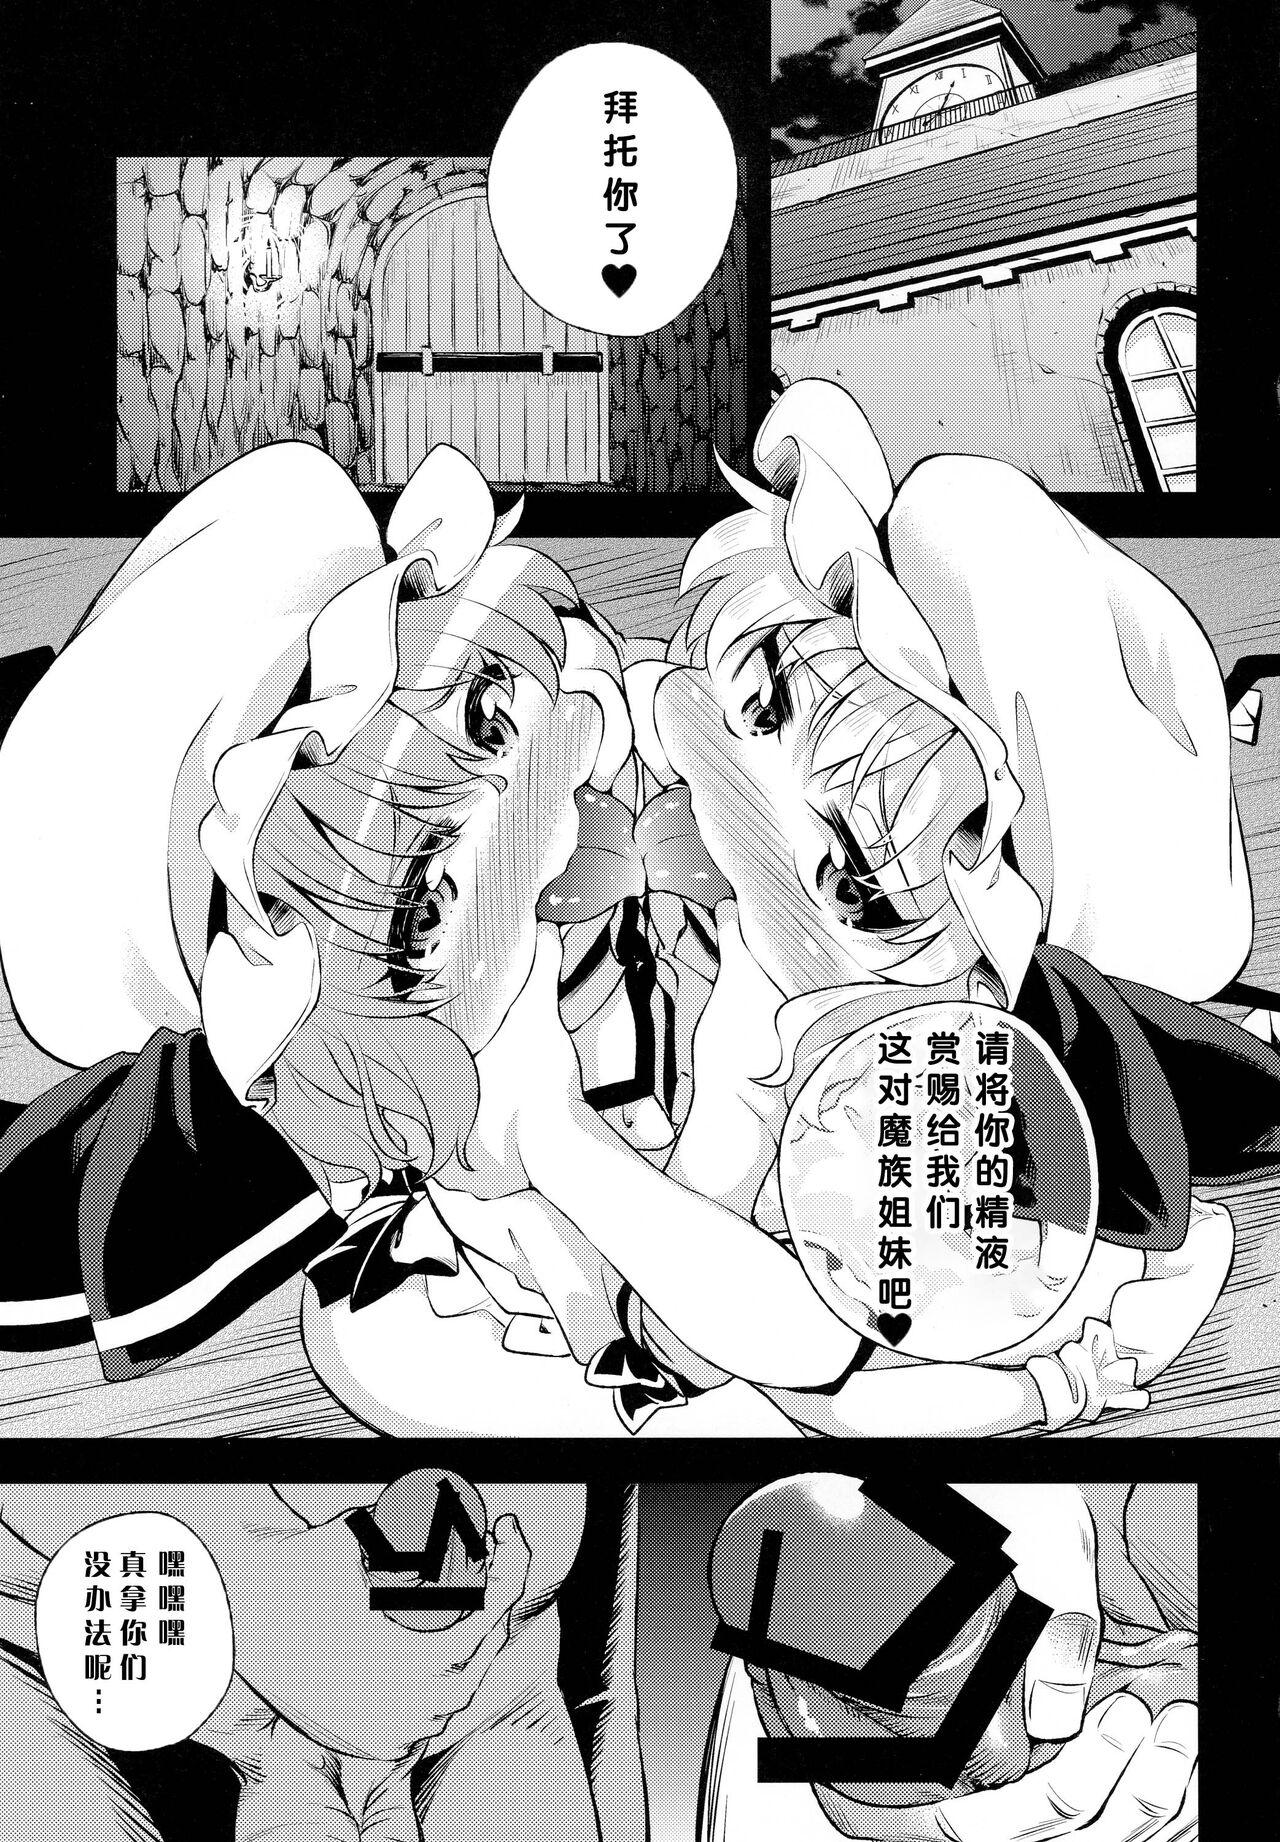 Fat Scarlet Hearts 4 - Touhou project Teensex - Page 4